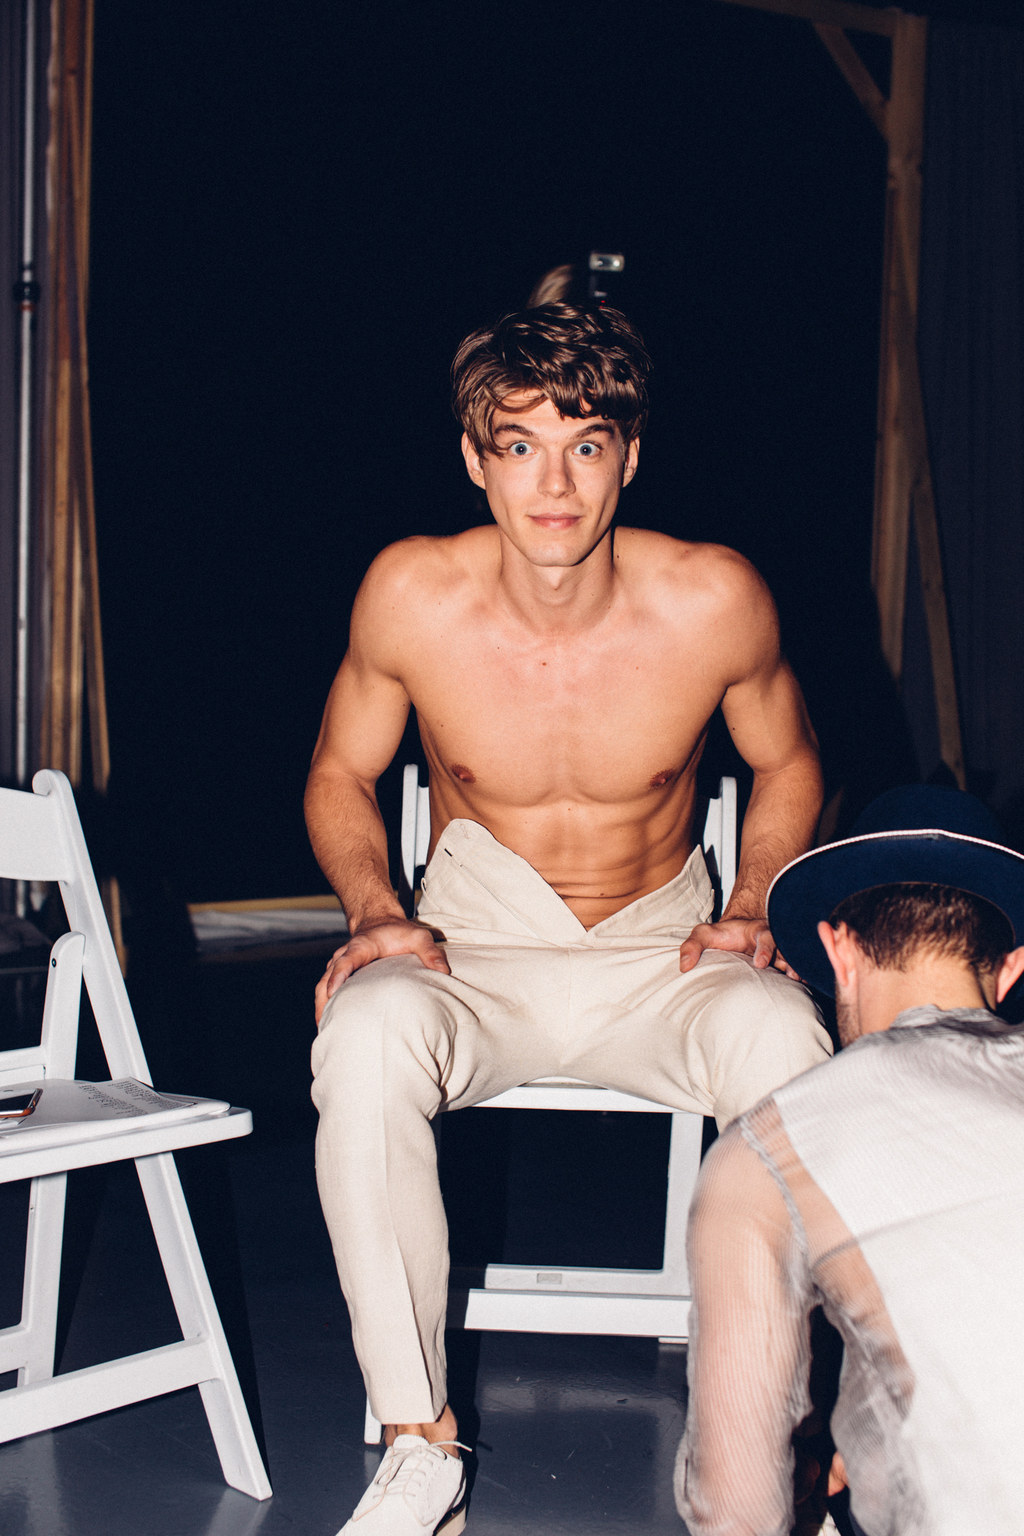 These Scenes From Backstage At A Mens Fashion Show Will Bring Your Mercury Out Of Retrograde 